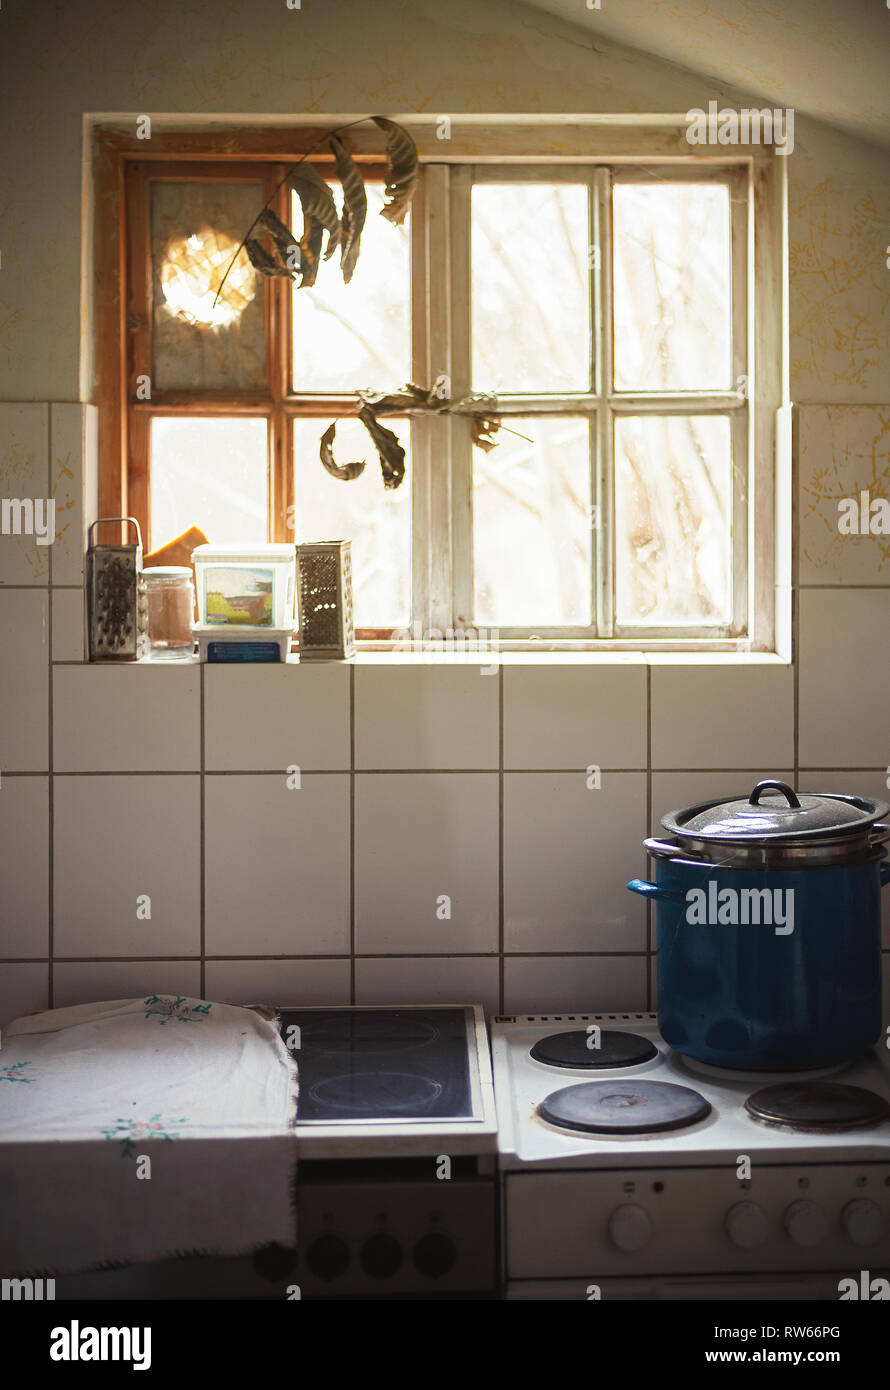 Part of an old fashioned retro kitchen and window. Stock Photo